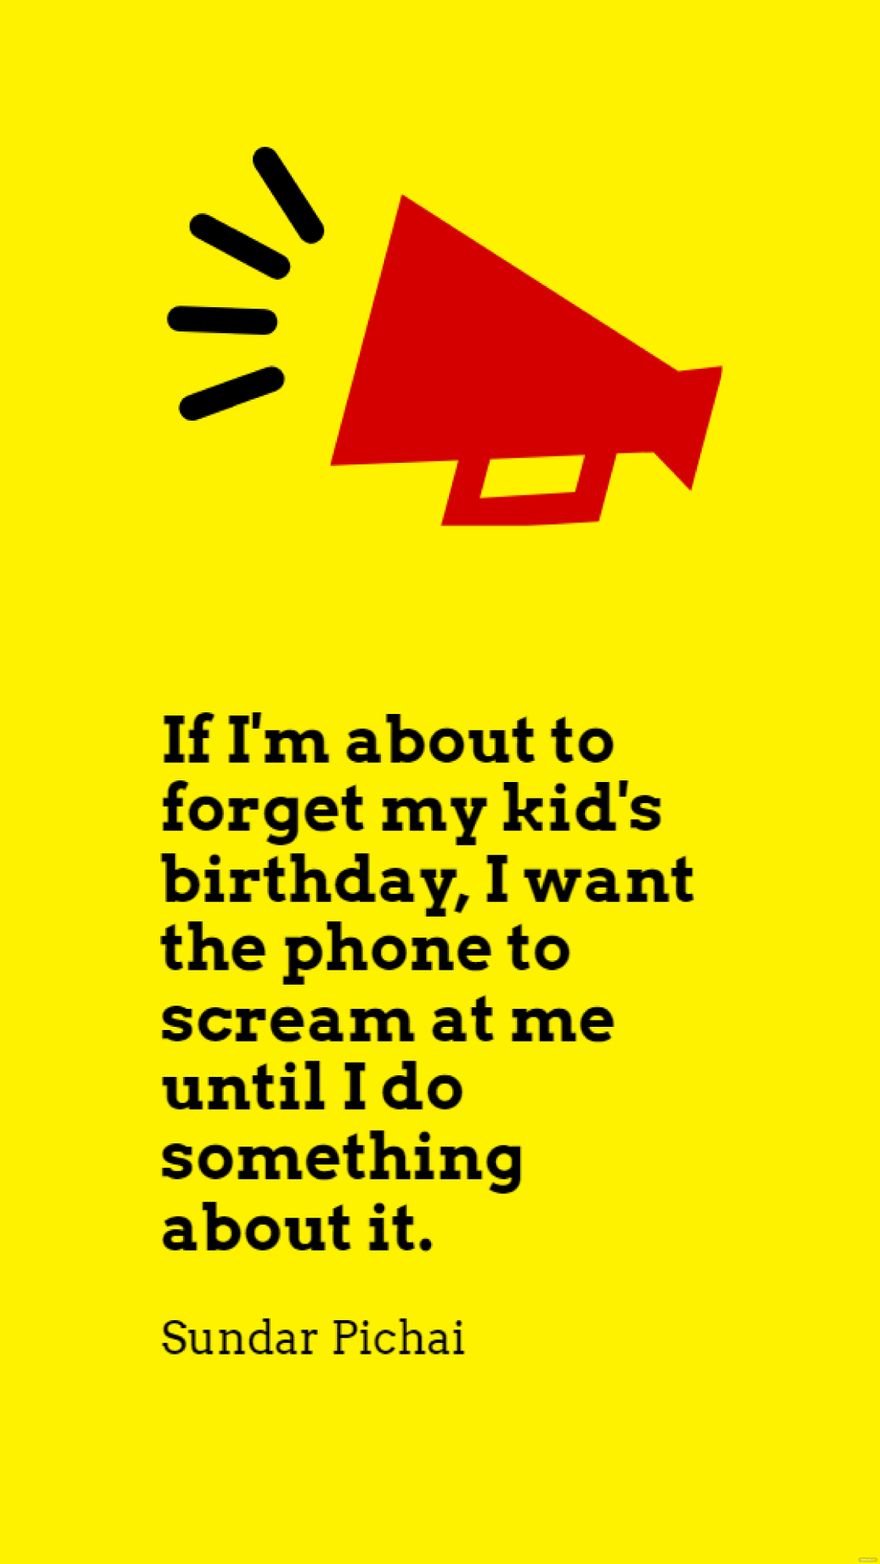 Sundar Pichai - If I'm about to forget my kid's birthday, I want the phone to scream at me until I do something about it. in JPG